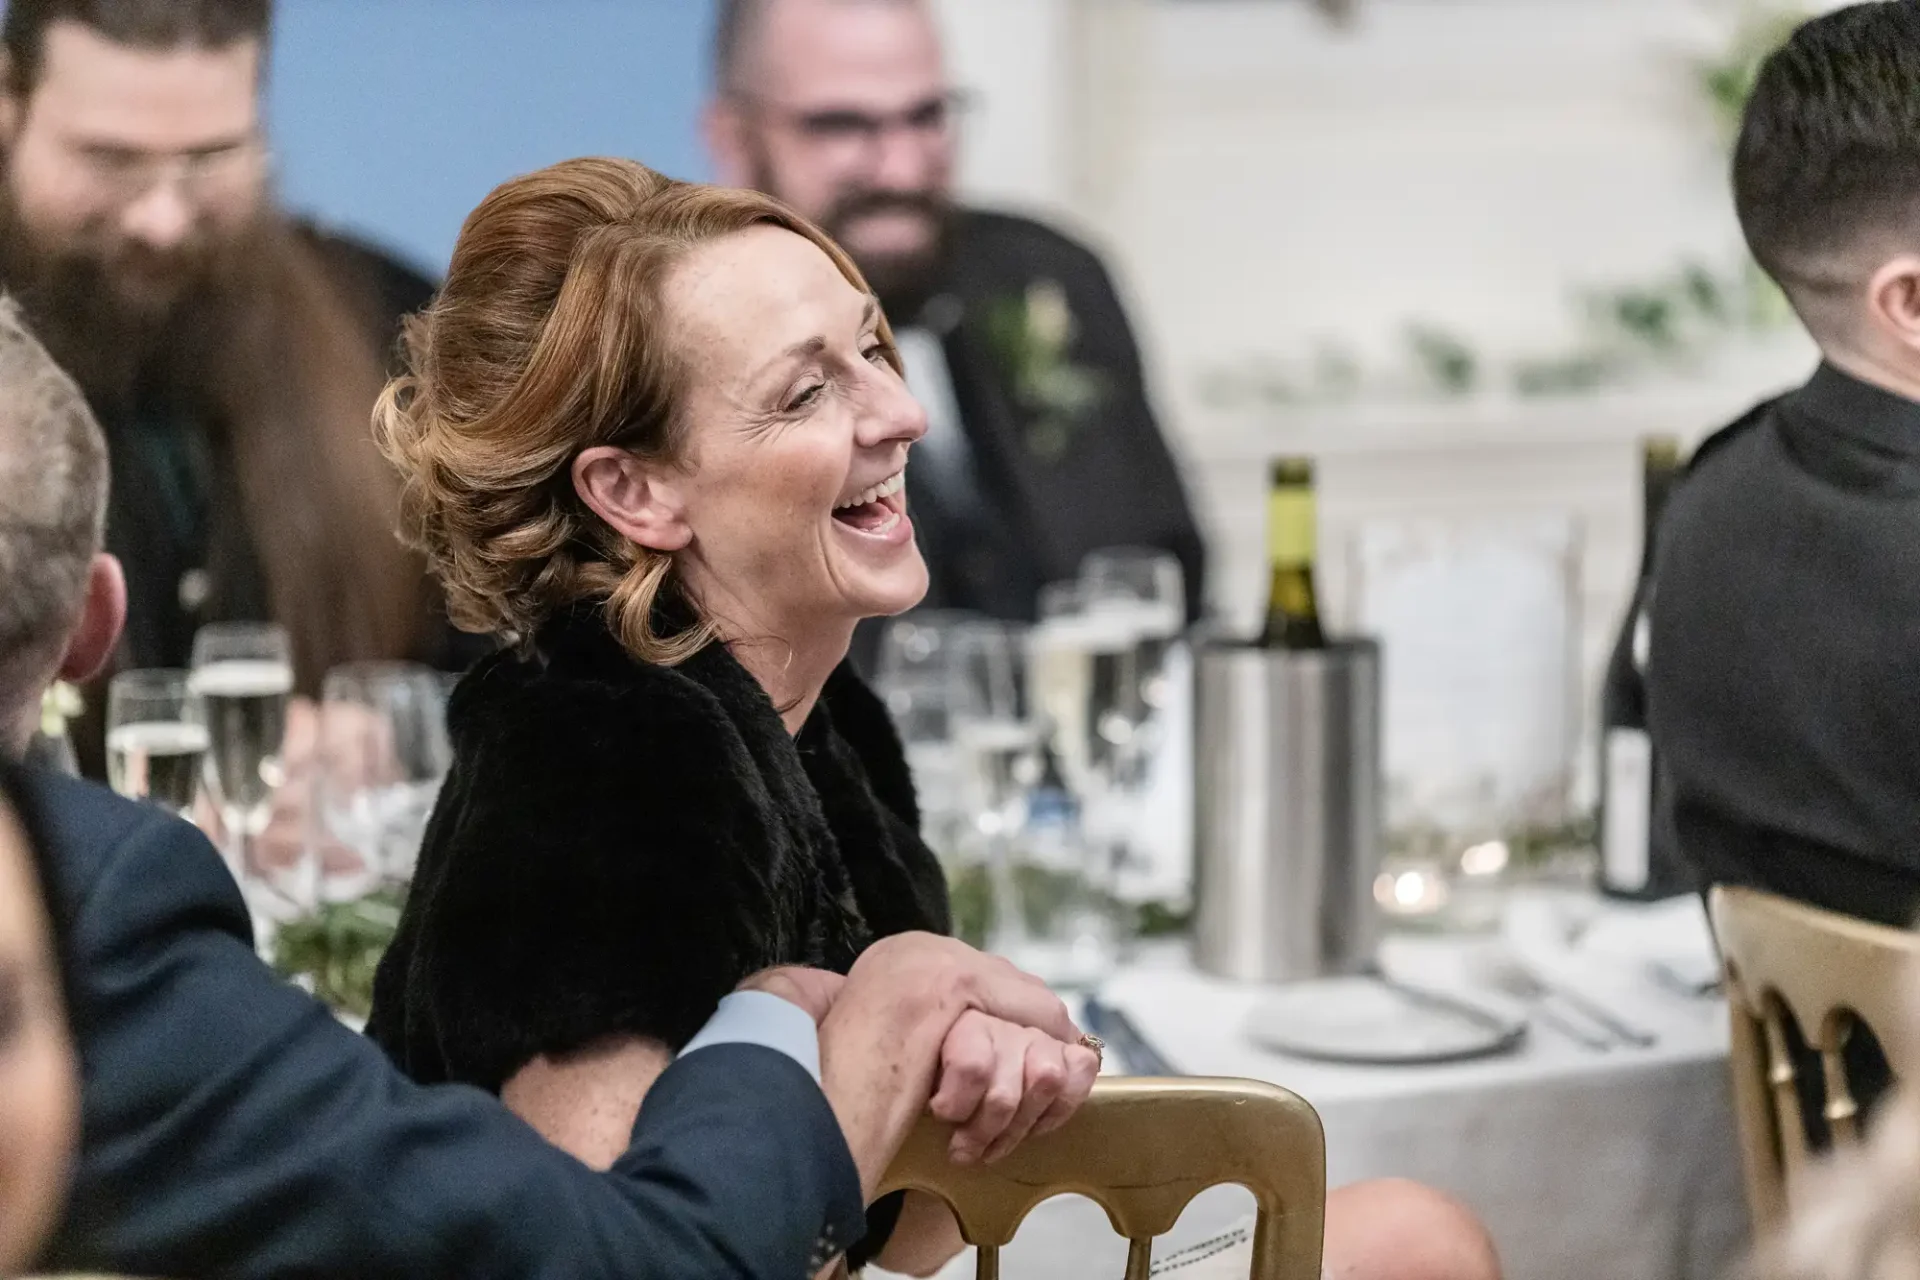 A woman with red hair laughing joyfully at a dinner table during a formal event, surrounded by other guests.